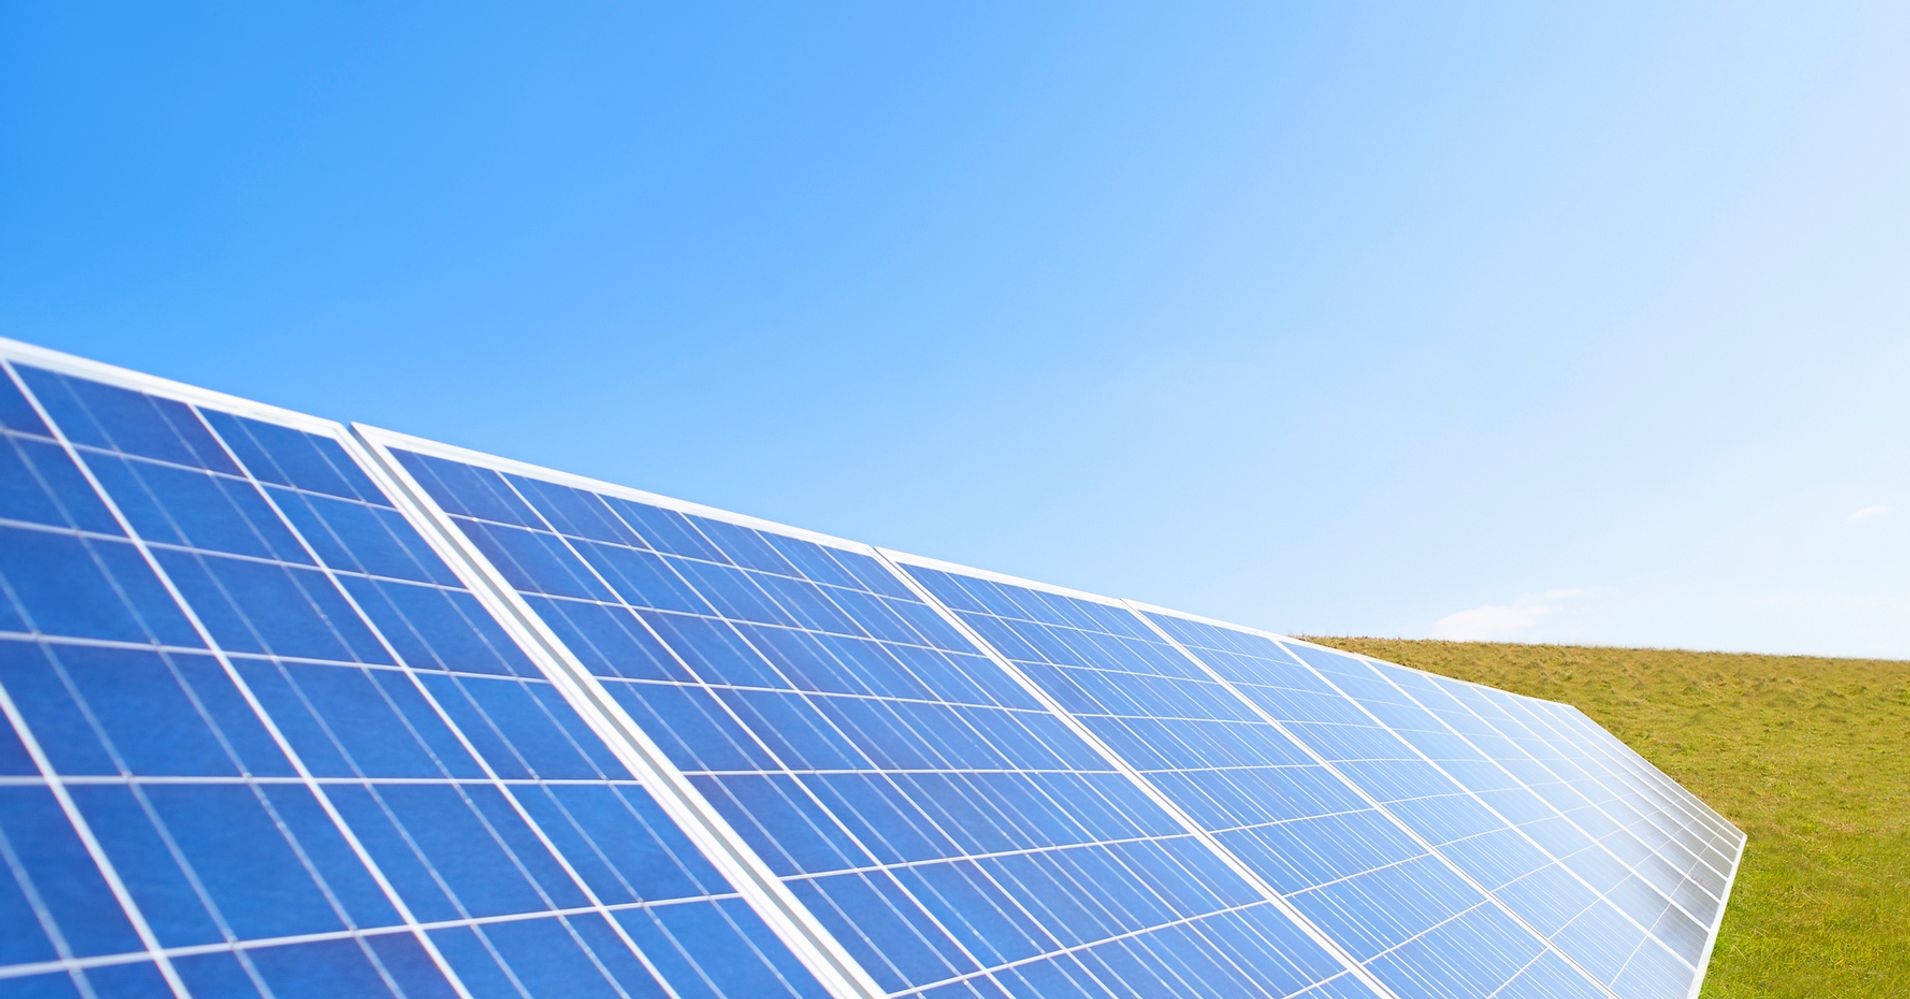 The Truth About Efficiency in Solar Power Generation | HuffPost